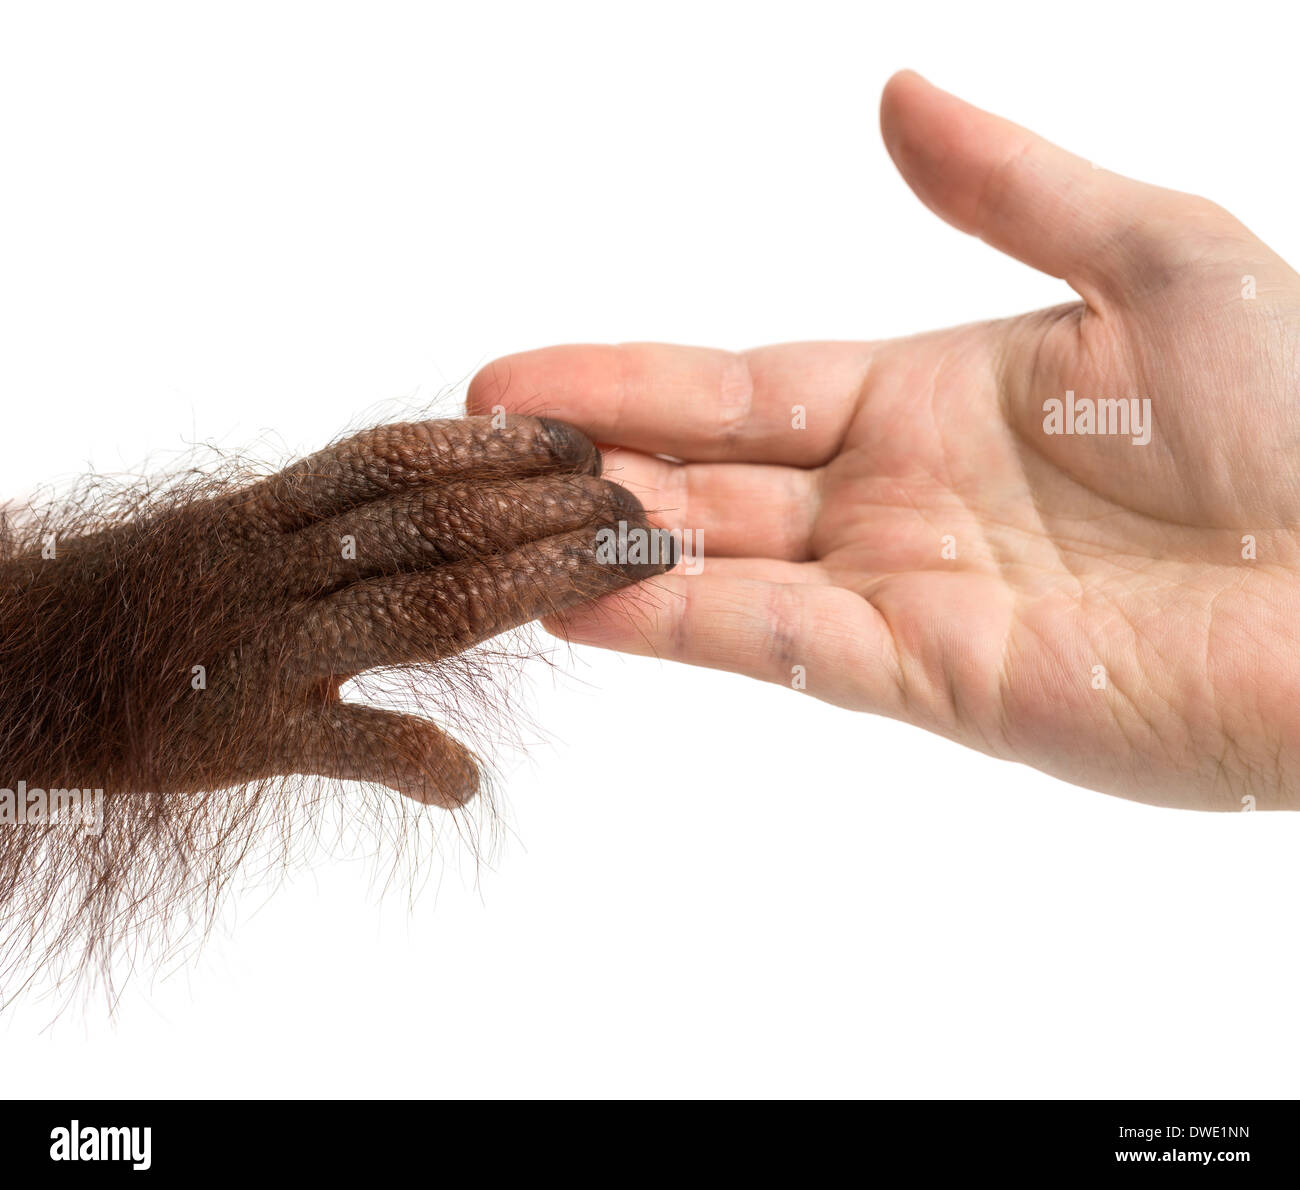 Close-up of a young Bornean orangutan's hand holding a human hand, Pongo pygmaeus, 18 months old, against white background Stock Photo